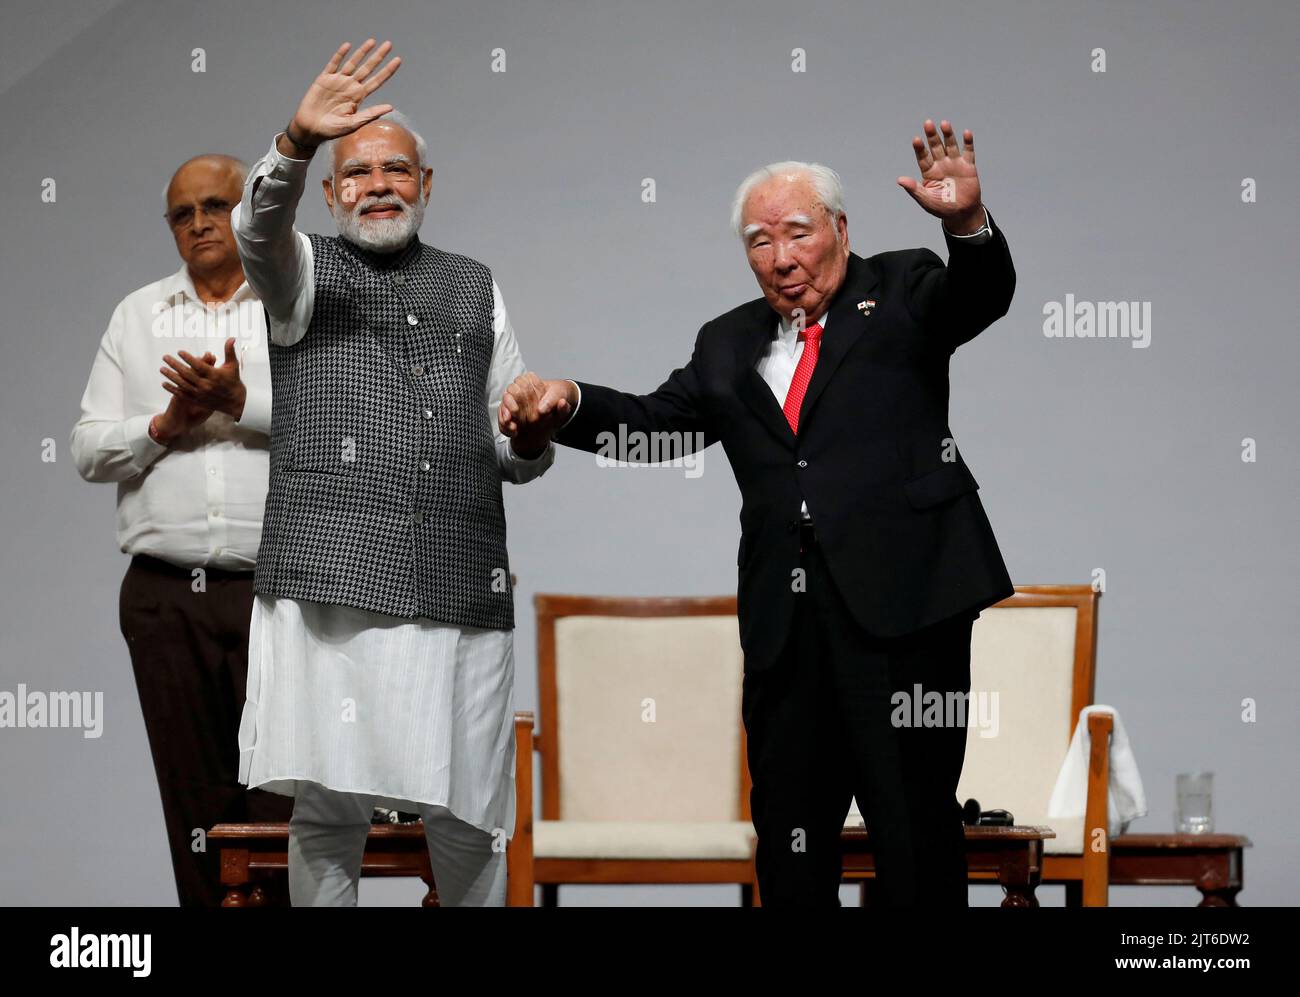 India's Prime Minister Narendra Modi and Japan's Suzuki Motor Corp former chairman Osamu Suzuki wave as Chief Minister of Gujarat Bhupendra Patel applauds during an event to commemorate 40 years of Suzuki in India, in Gandhinagar, in the western state of Gujarat, India, August 28, 2022. REUTERS/Amit Dave Stock Photo